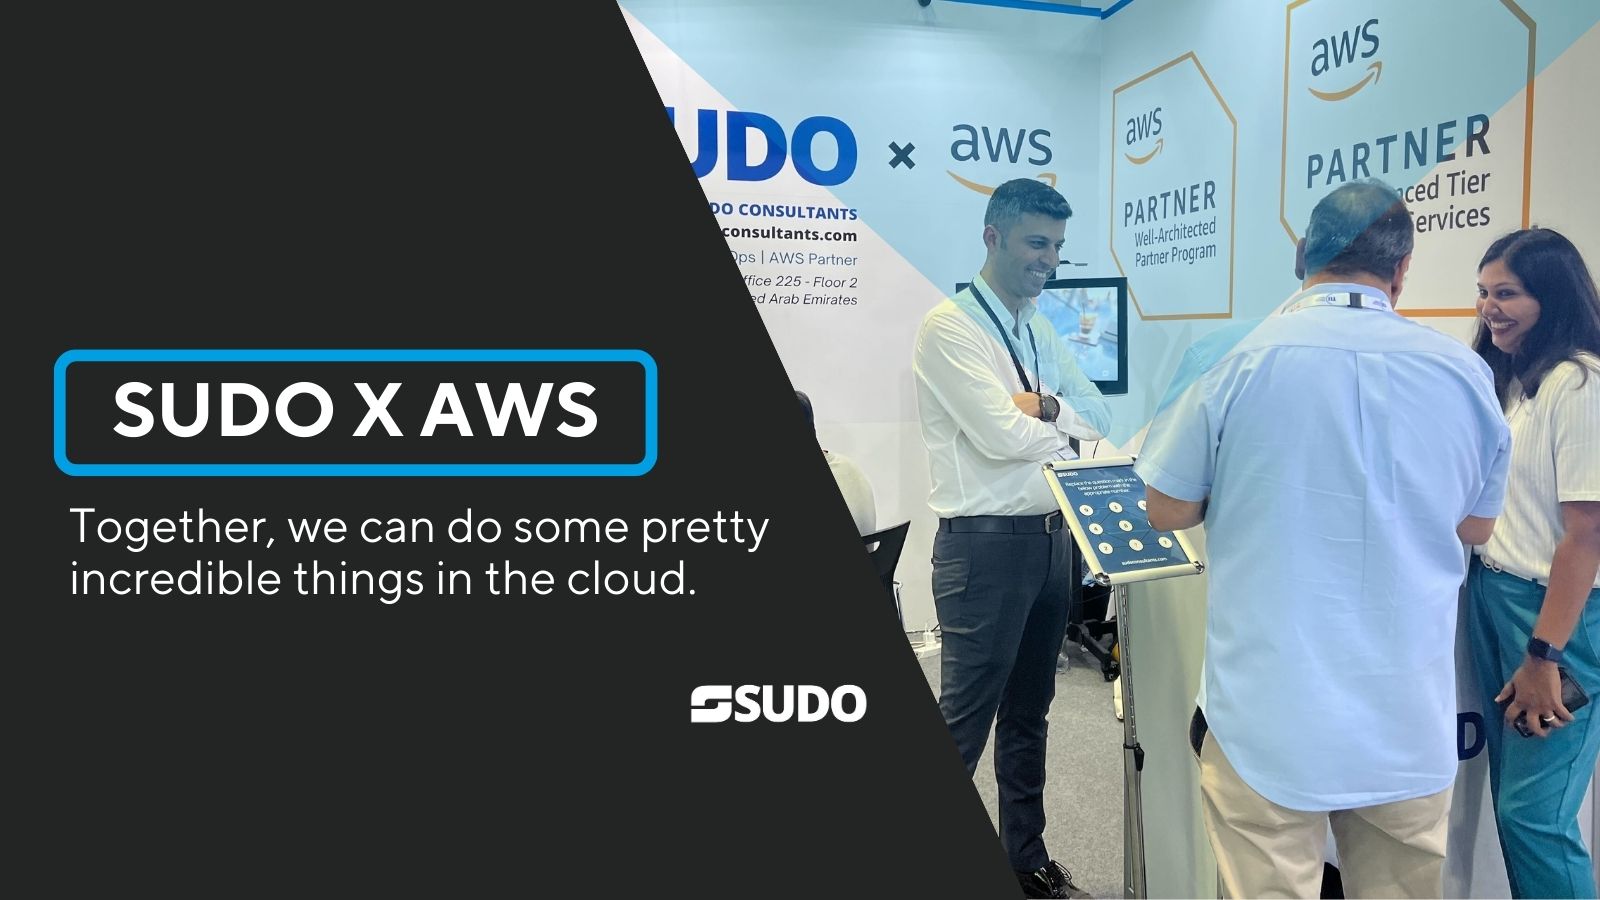 SmartPoint’s Agile Transformation through SUDO’s Managed Services on AWS